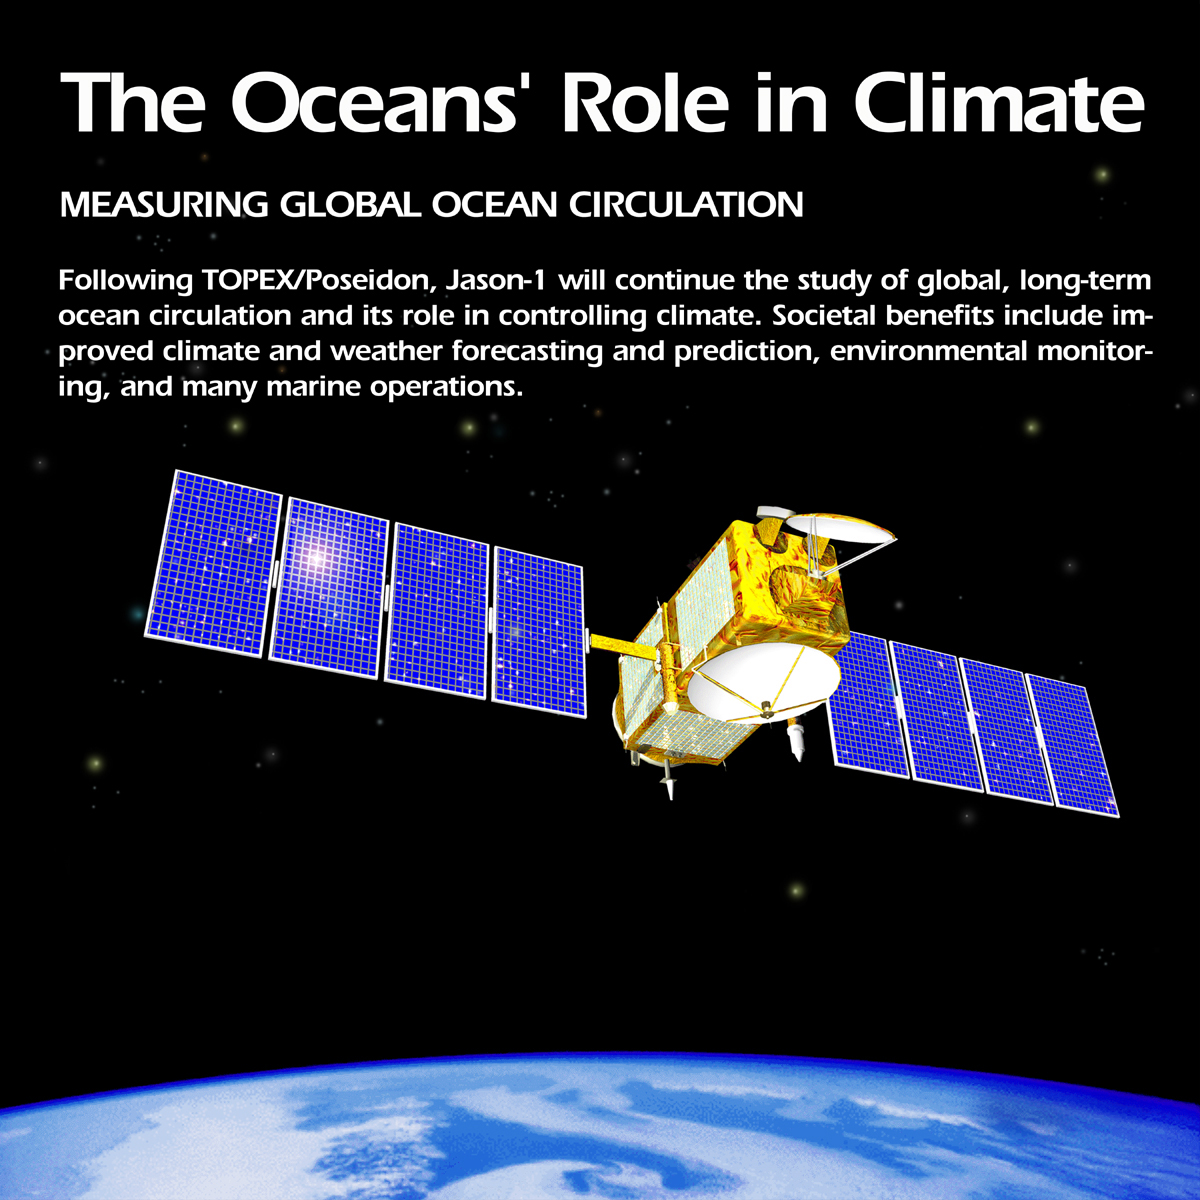 Oceans' Role in Climate - Jason-1